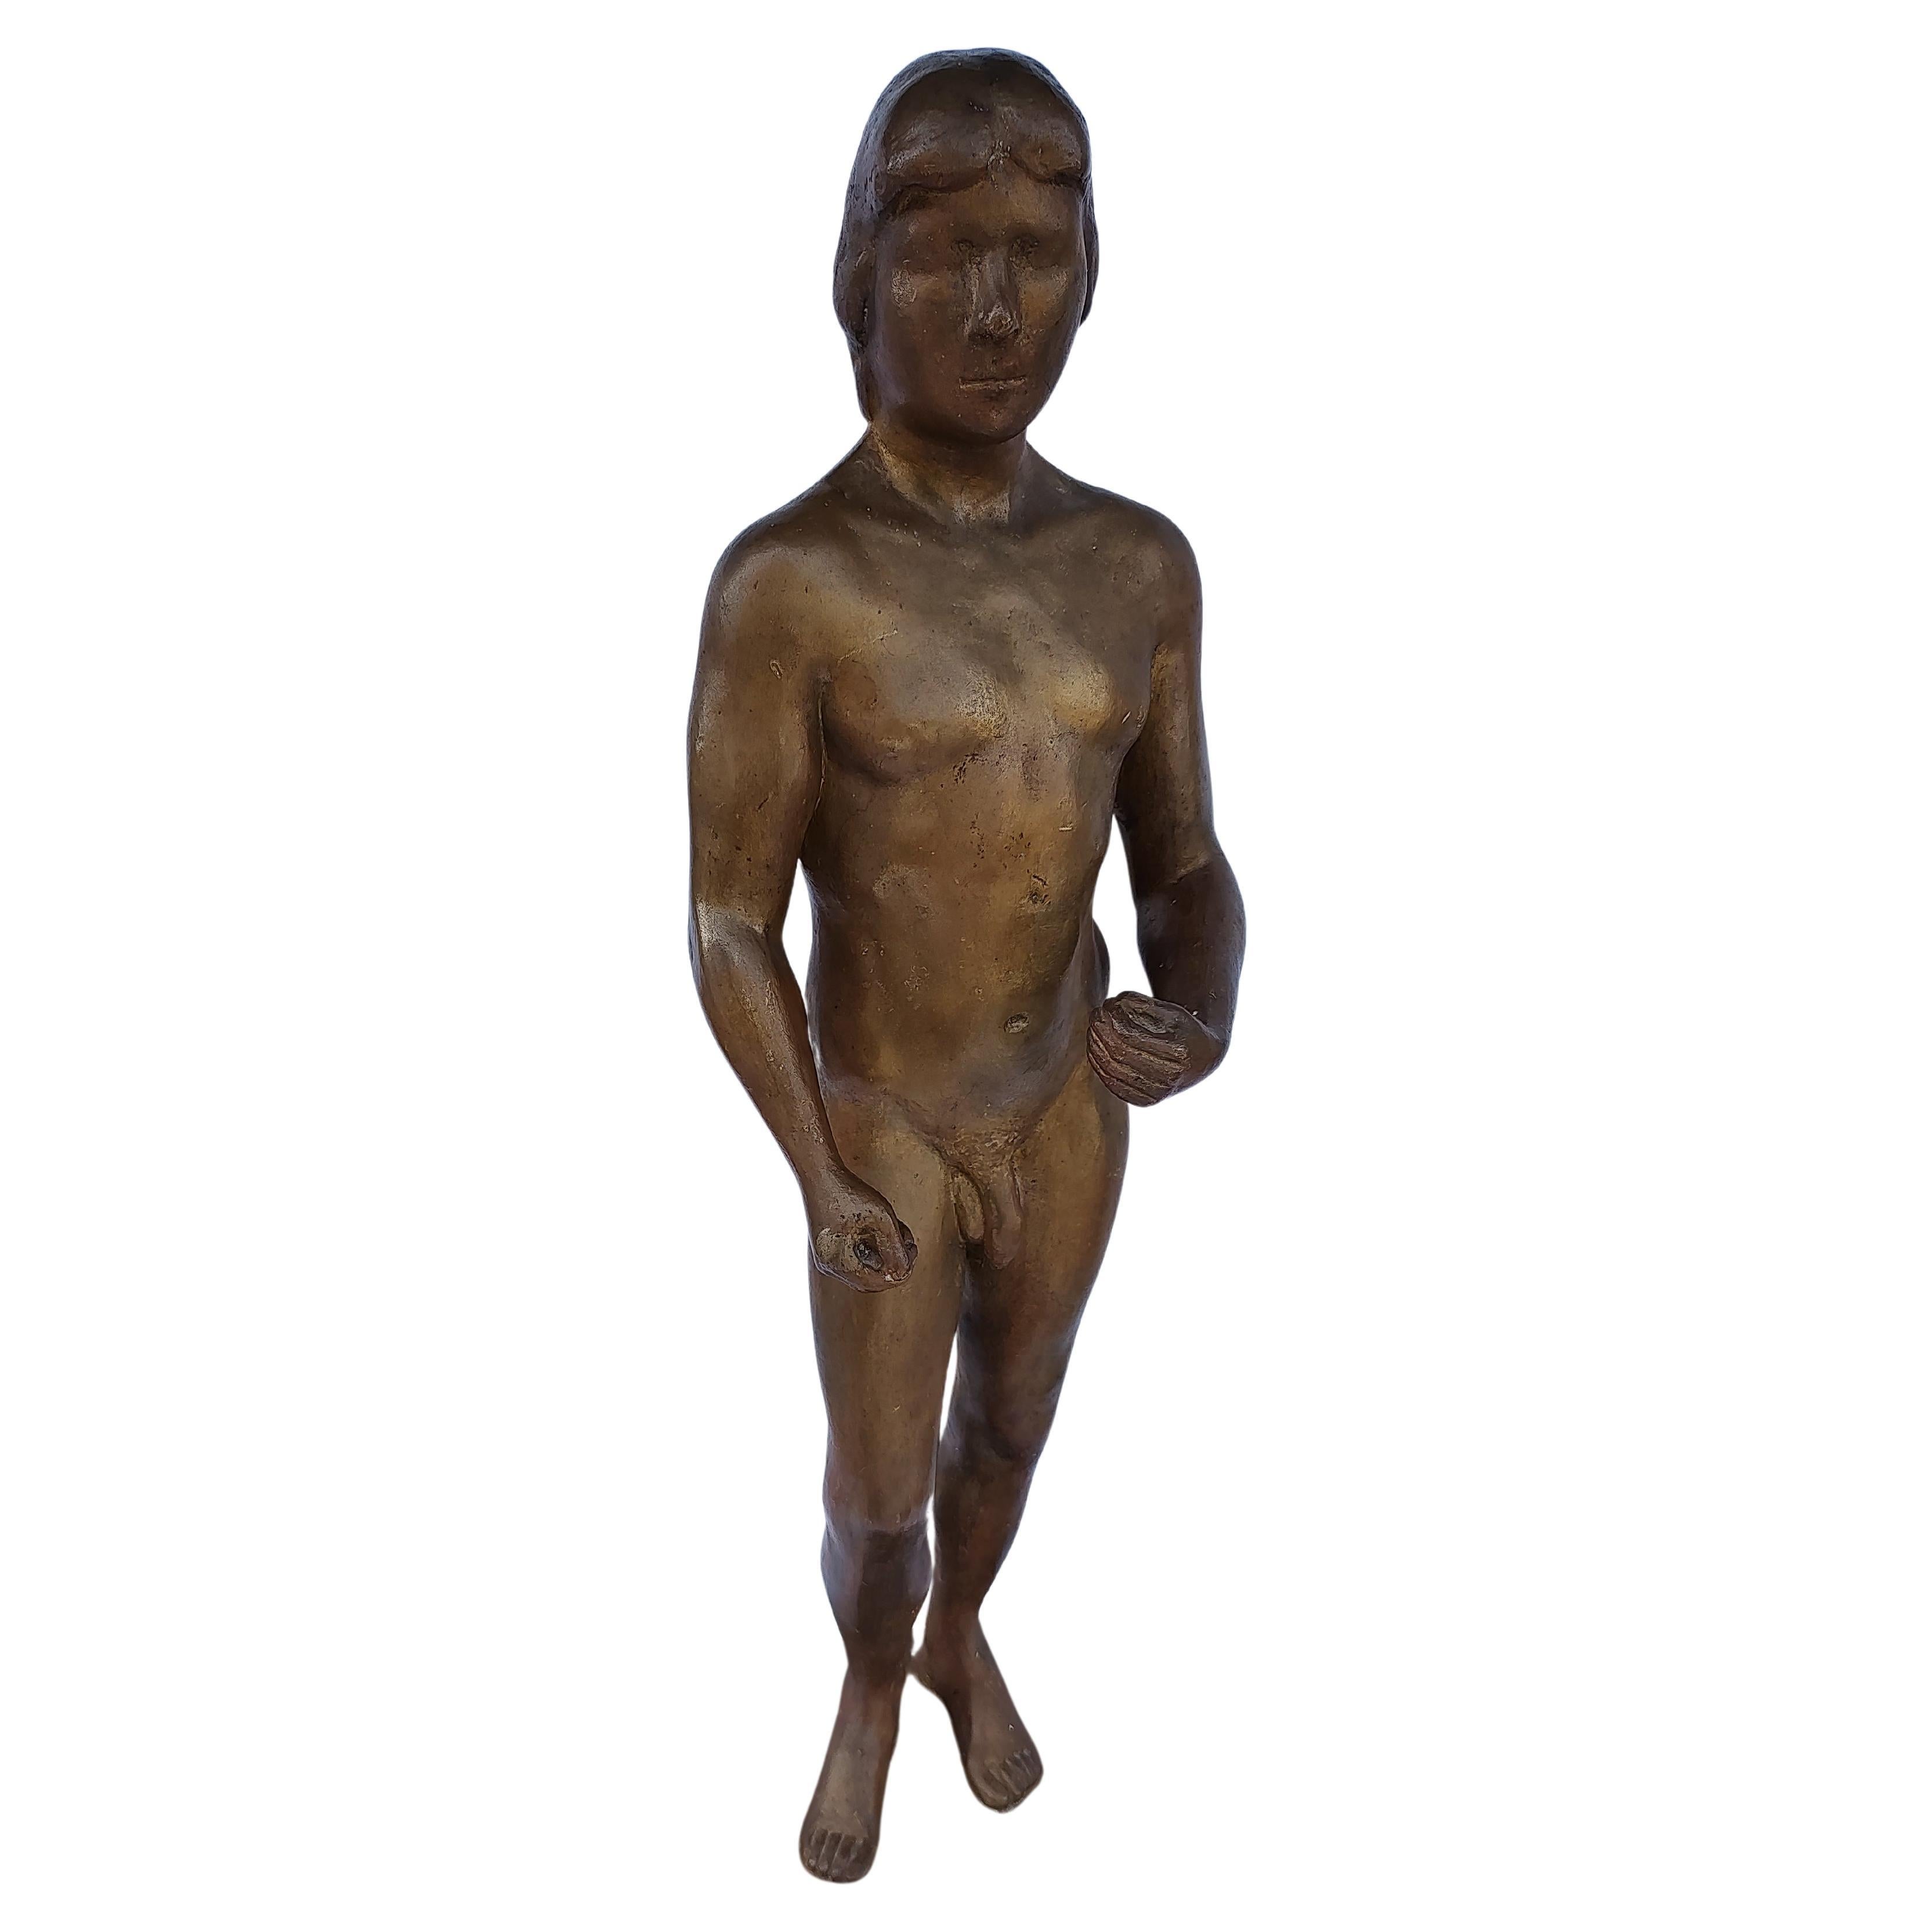 Midcentury Bronze Sculpture of a Nude Male Foundry Guss Barth Rinteen